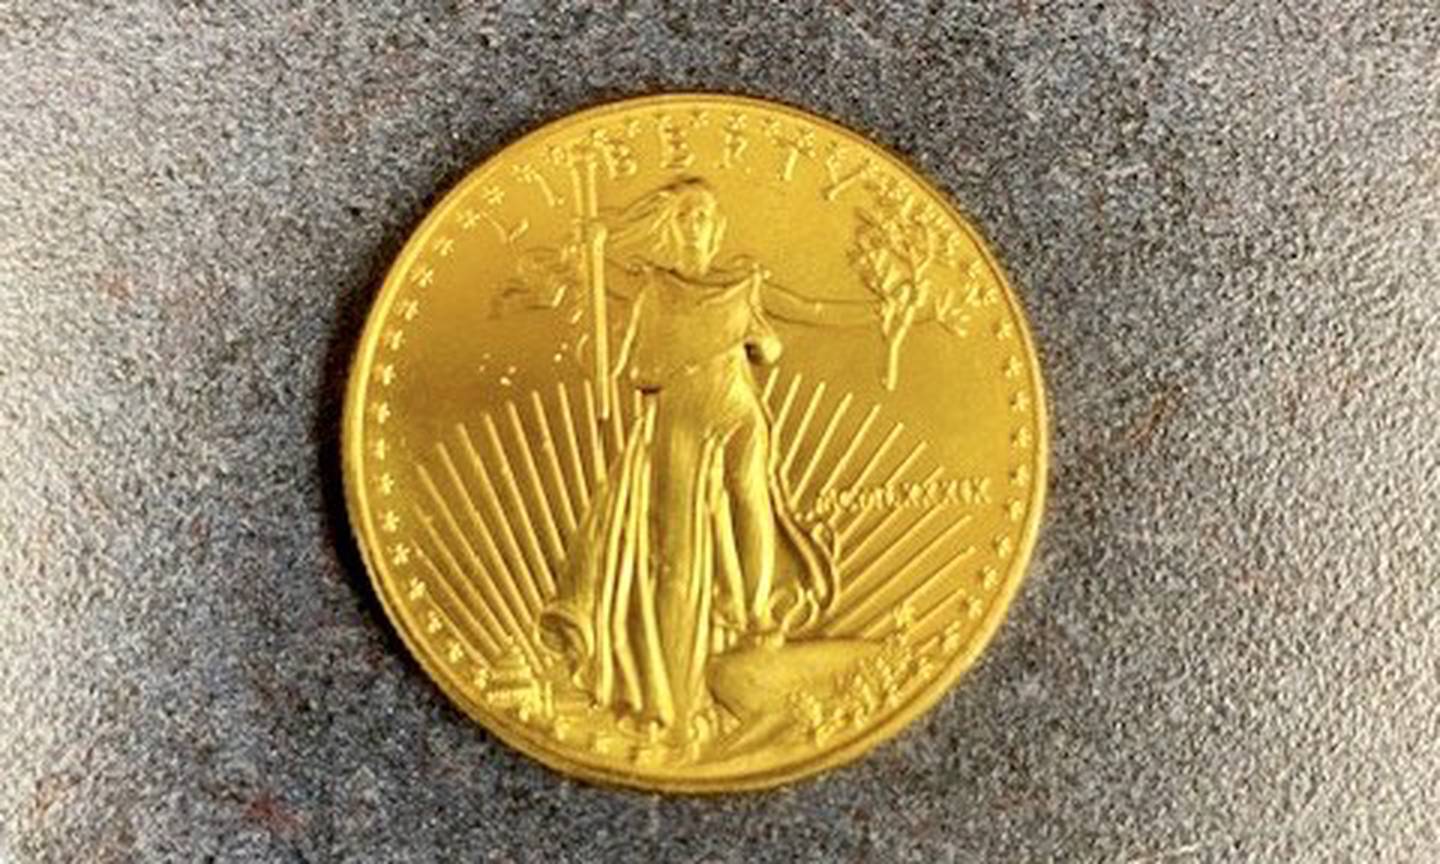 $50 Gold American Eagle Coin donated to the Salvation Army Tri-Cities Corps in the donation basket earlier this month.